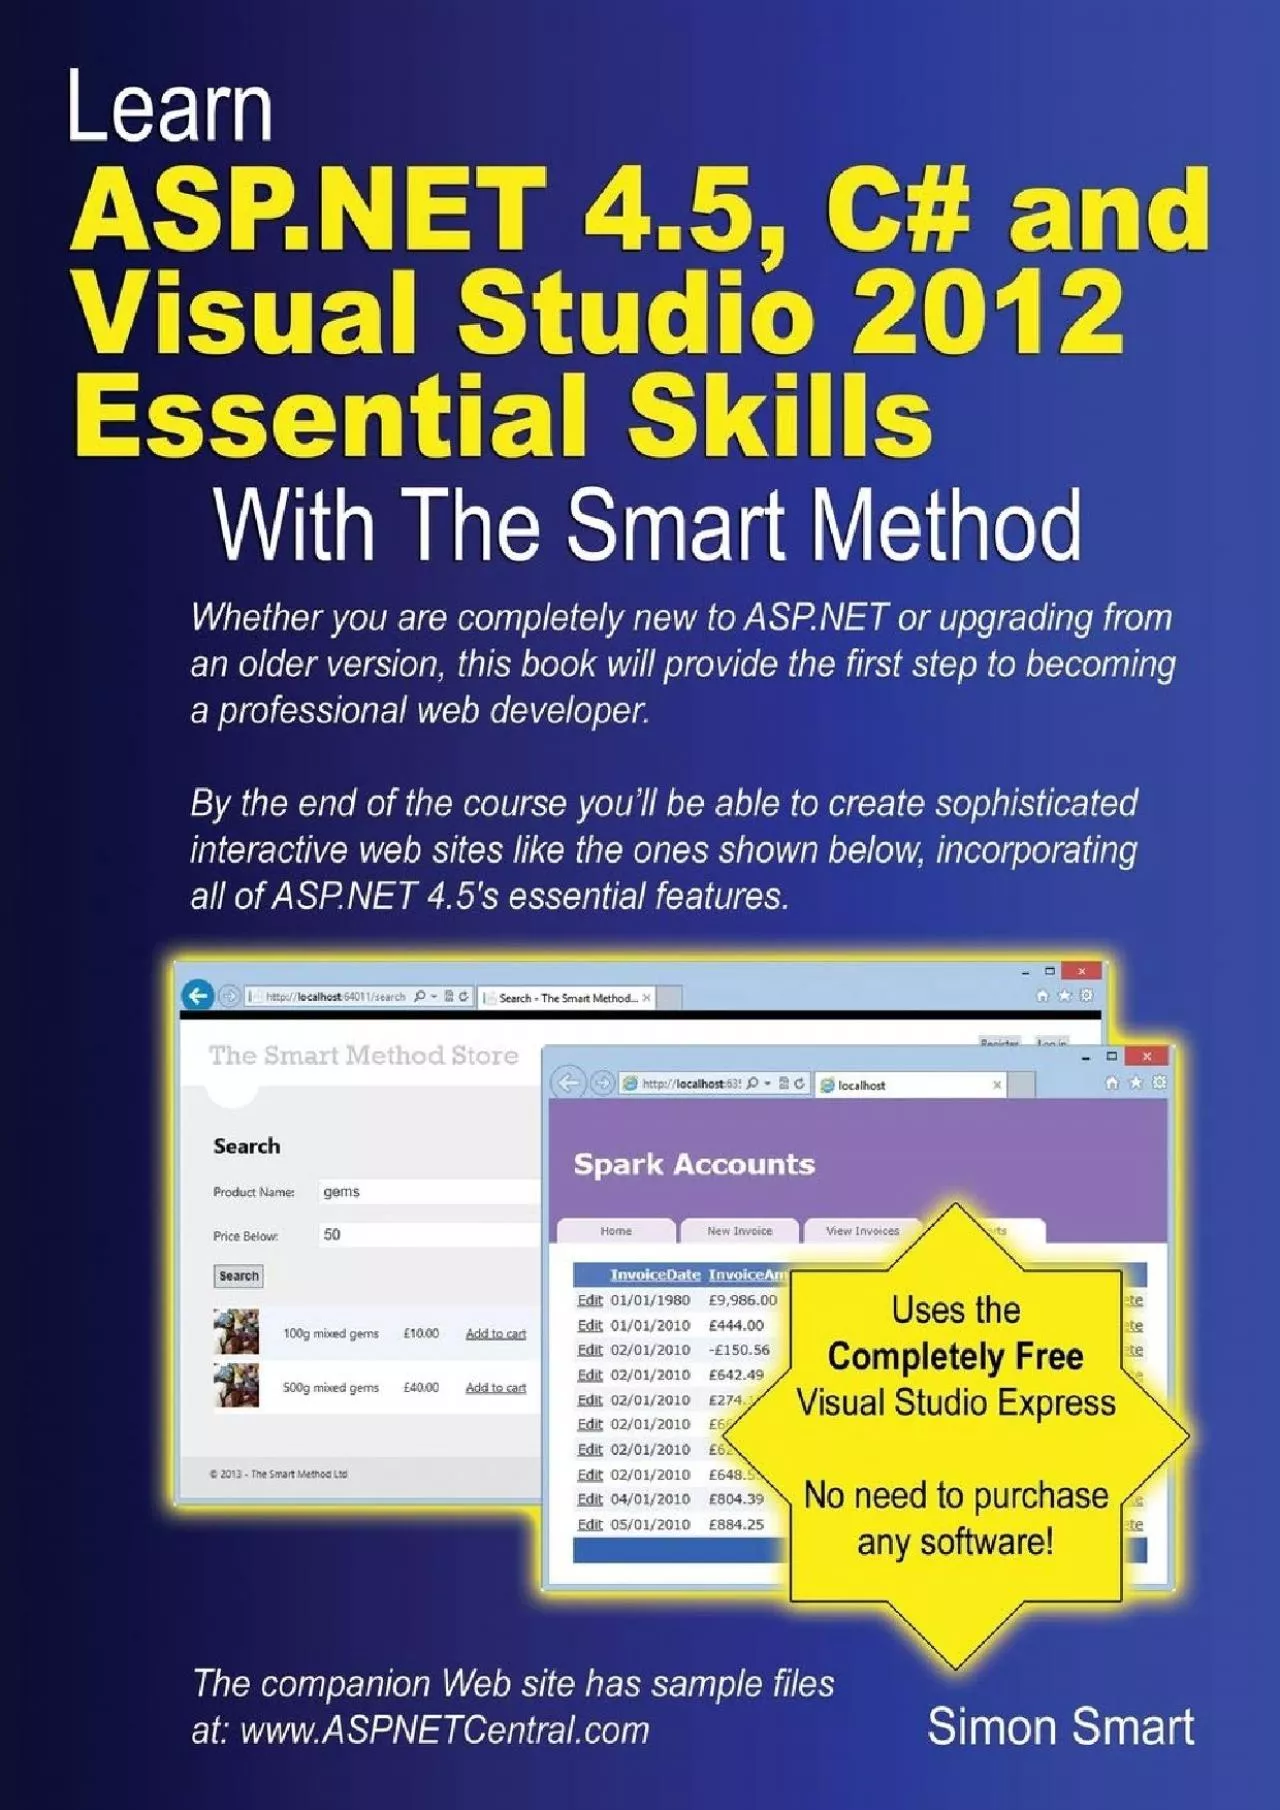 [DOWLOAD]-Learn ASP.NET 4.5, C and Visual Studio 2012 Essential Skills with The Smart